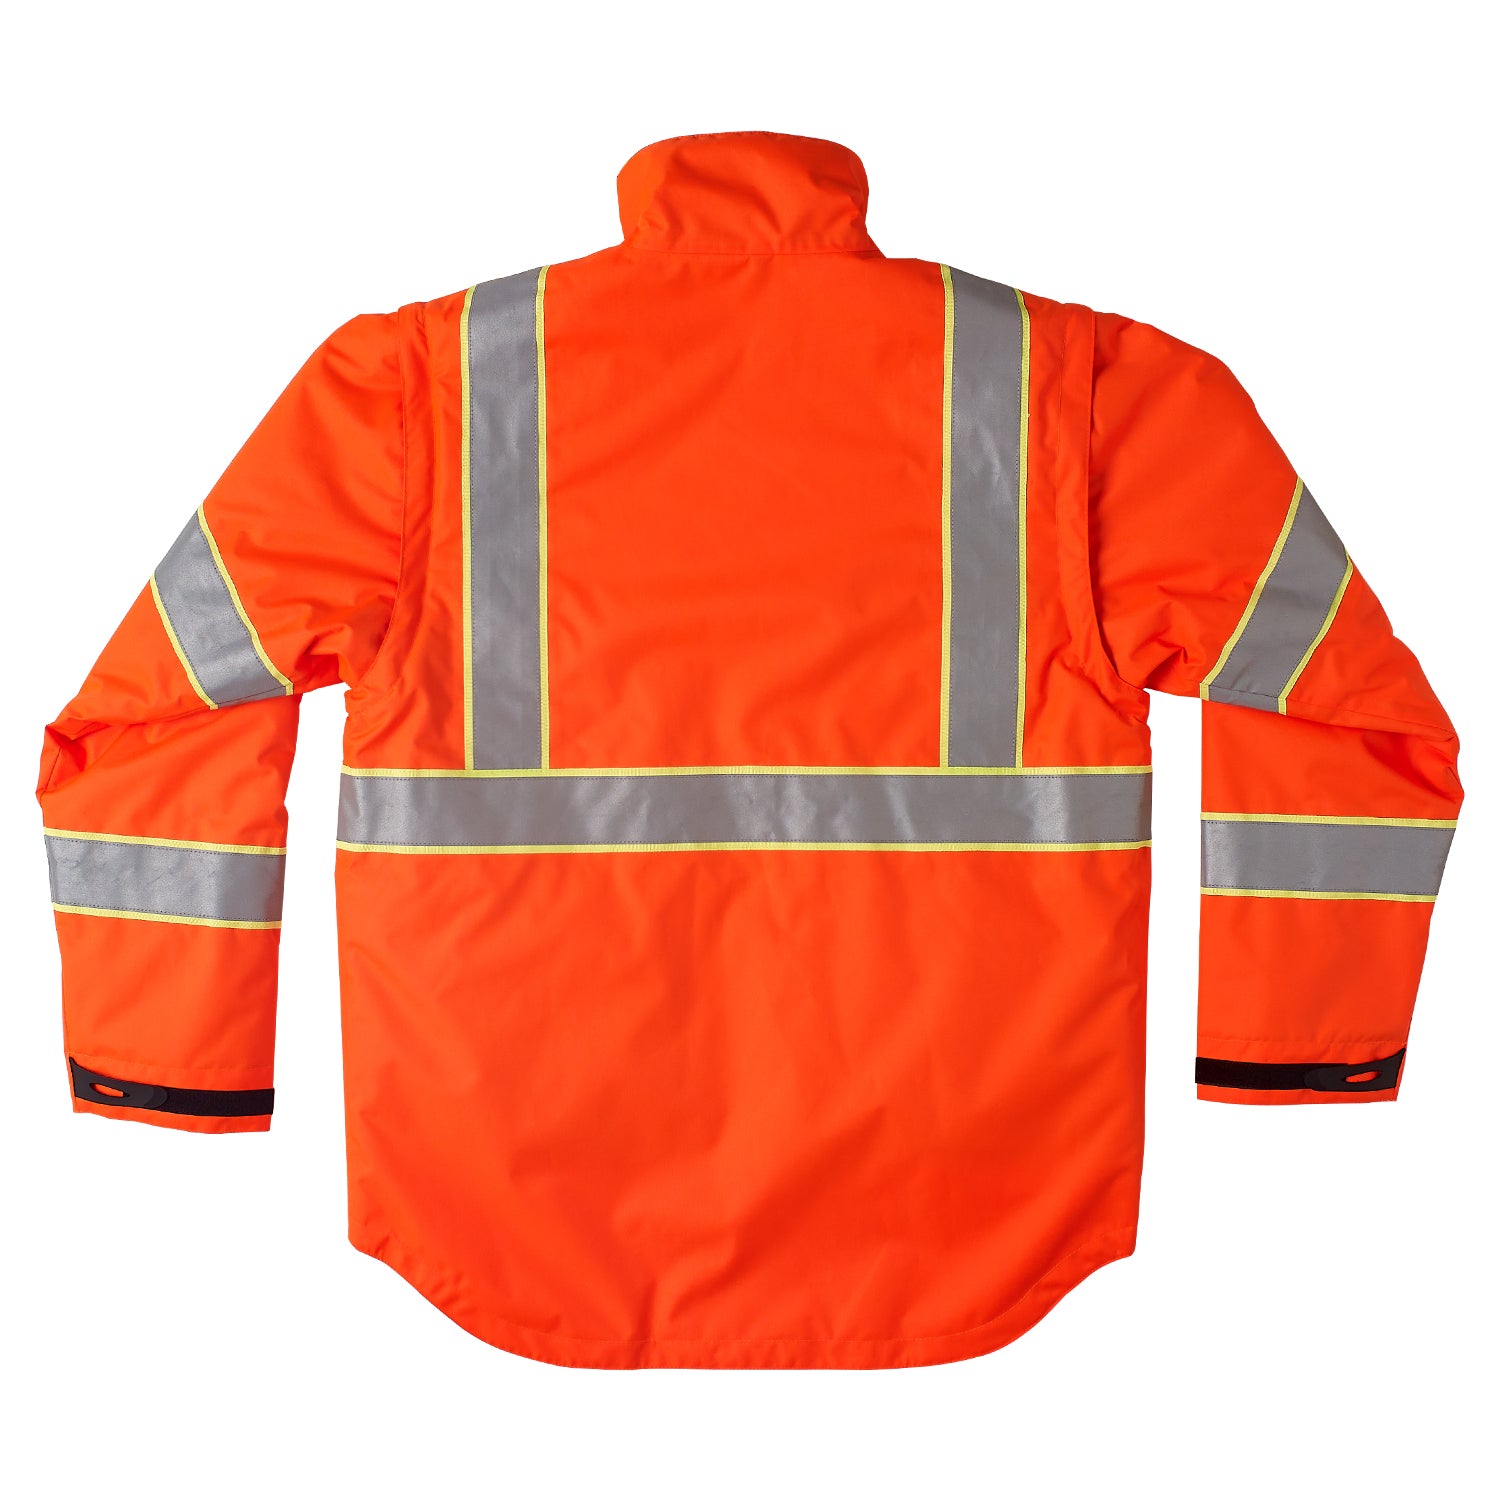 RPES 1 Inch Green,Orange Reflective Safety Jacket For Road Safety,Construction-Pack  of 6 : Amazon.in: Industrial & Scientific